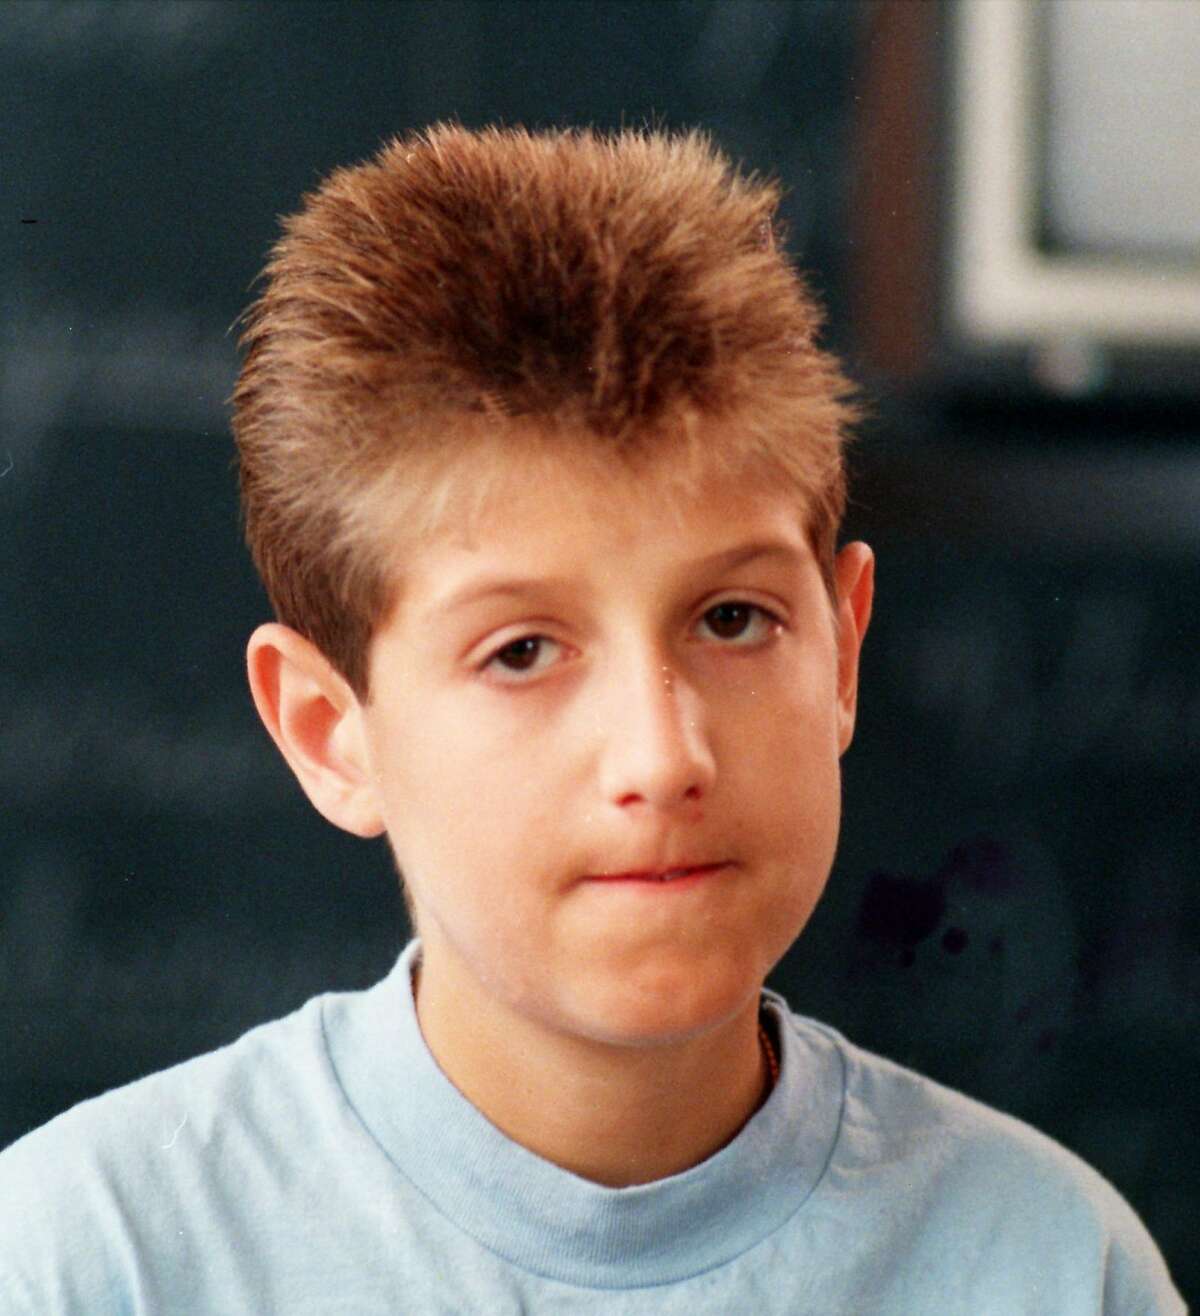 AIDS victim Ryan White, is shown in this 1988 photo. (AP Photo)